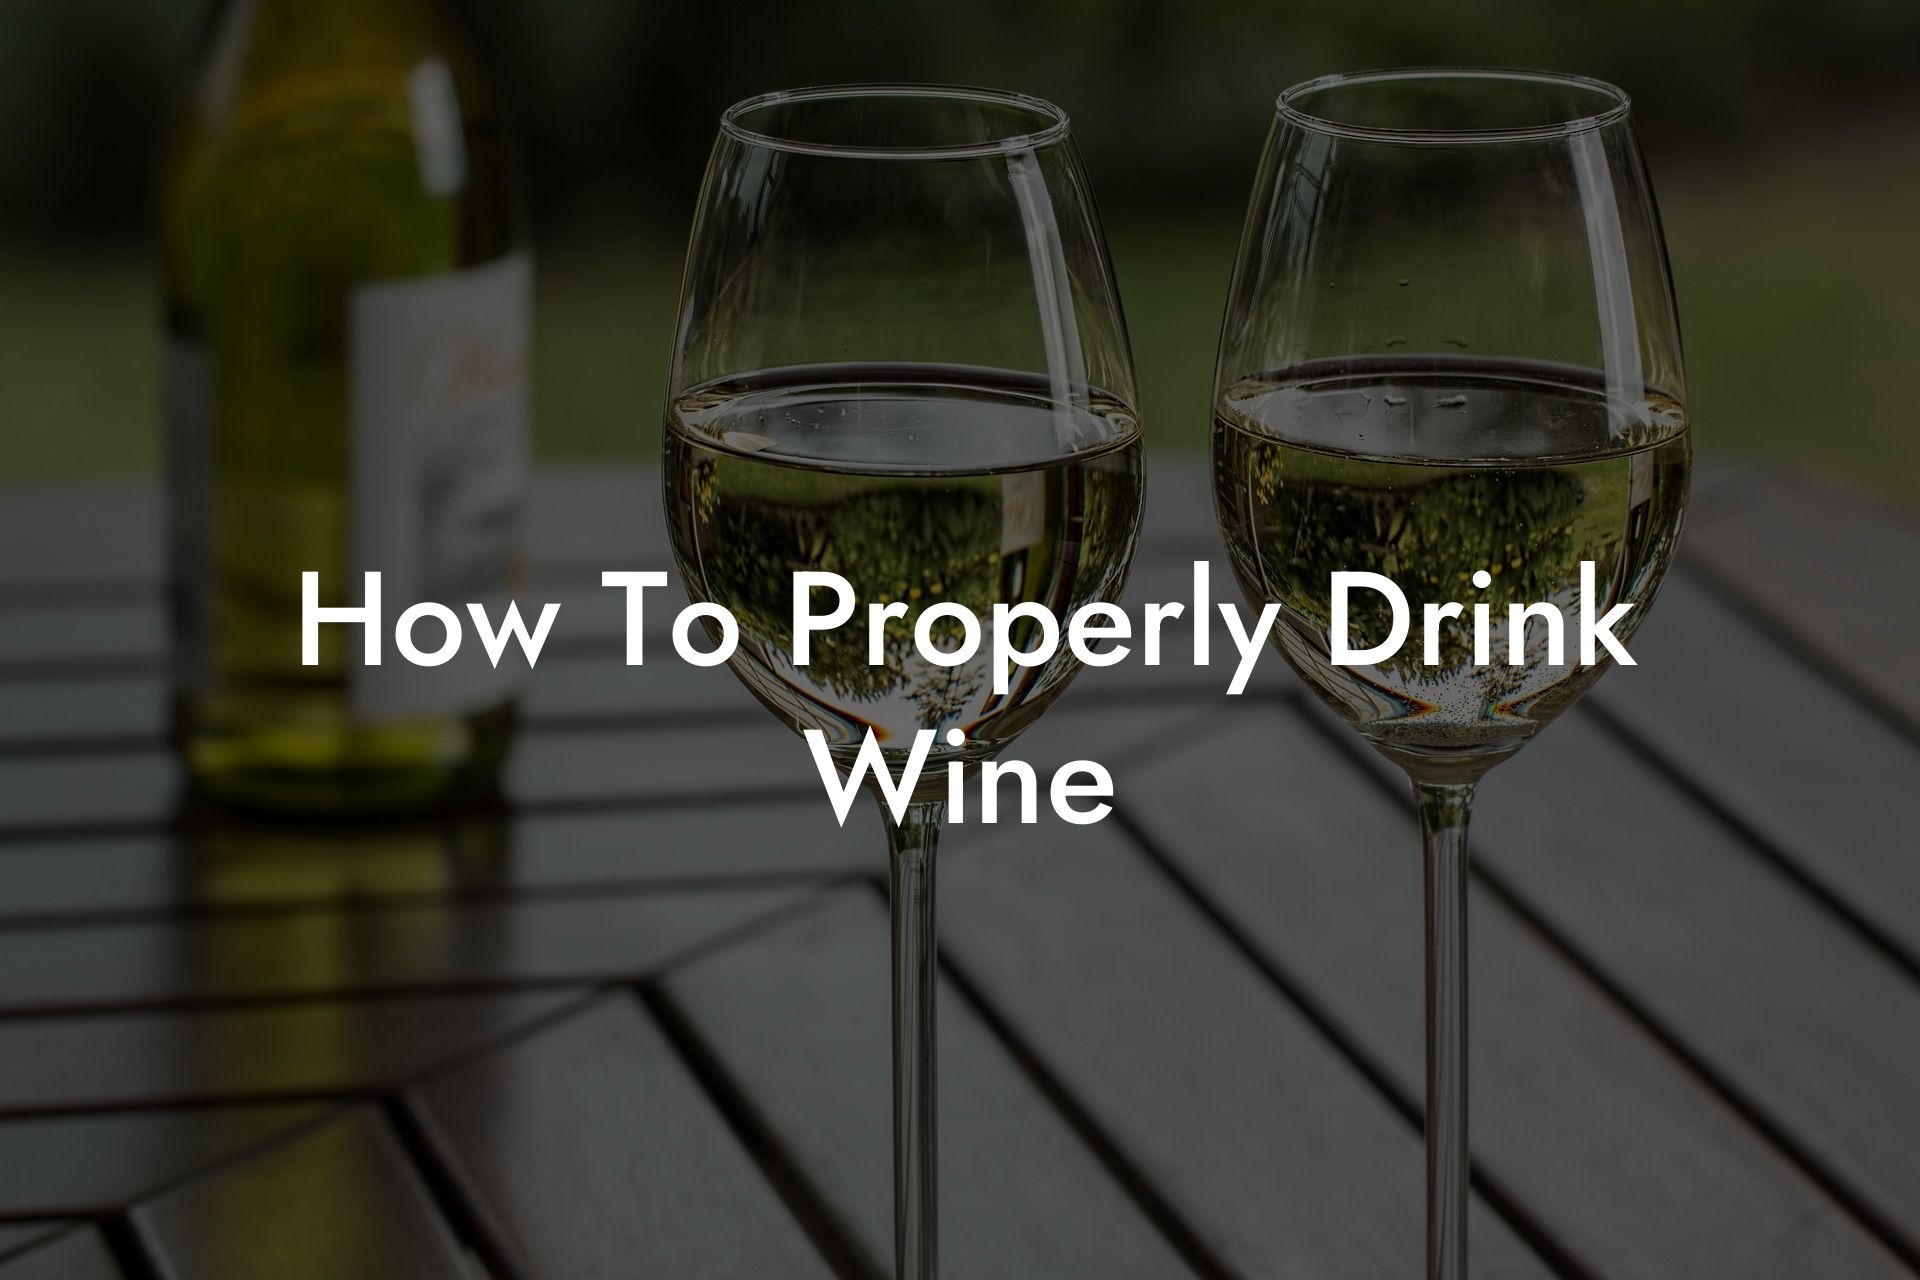 How To Properly Drink Wine